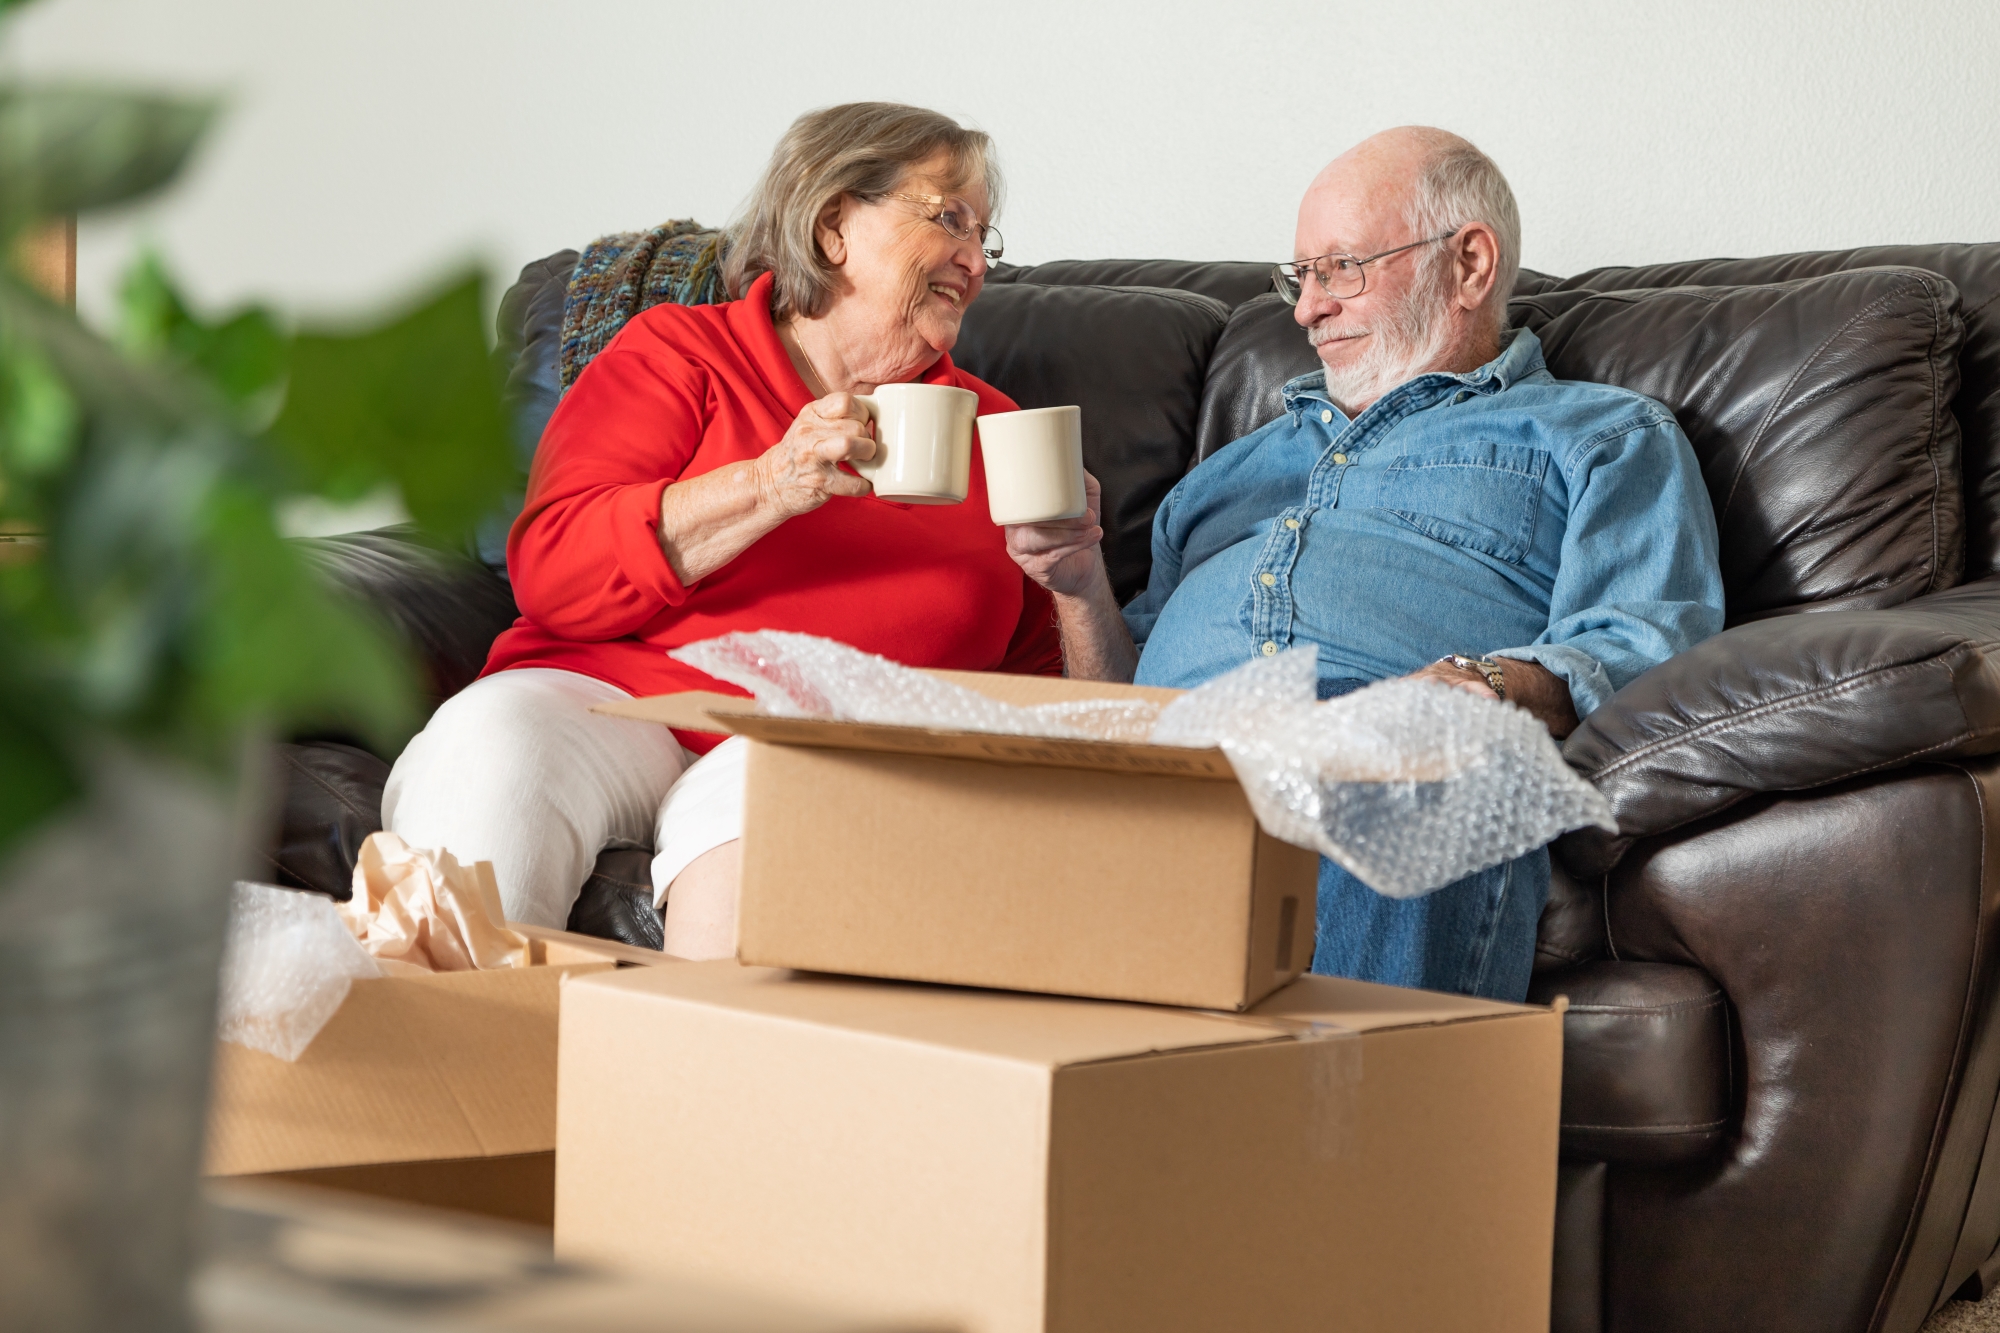 Elderly couple toasting mugs on sofa in front of boxes